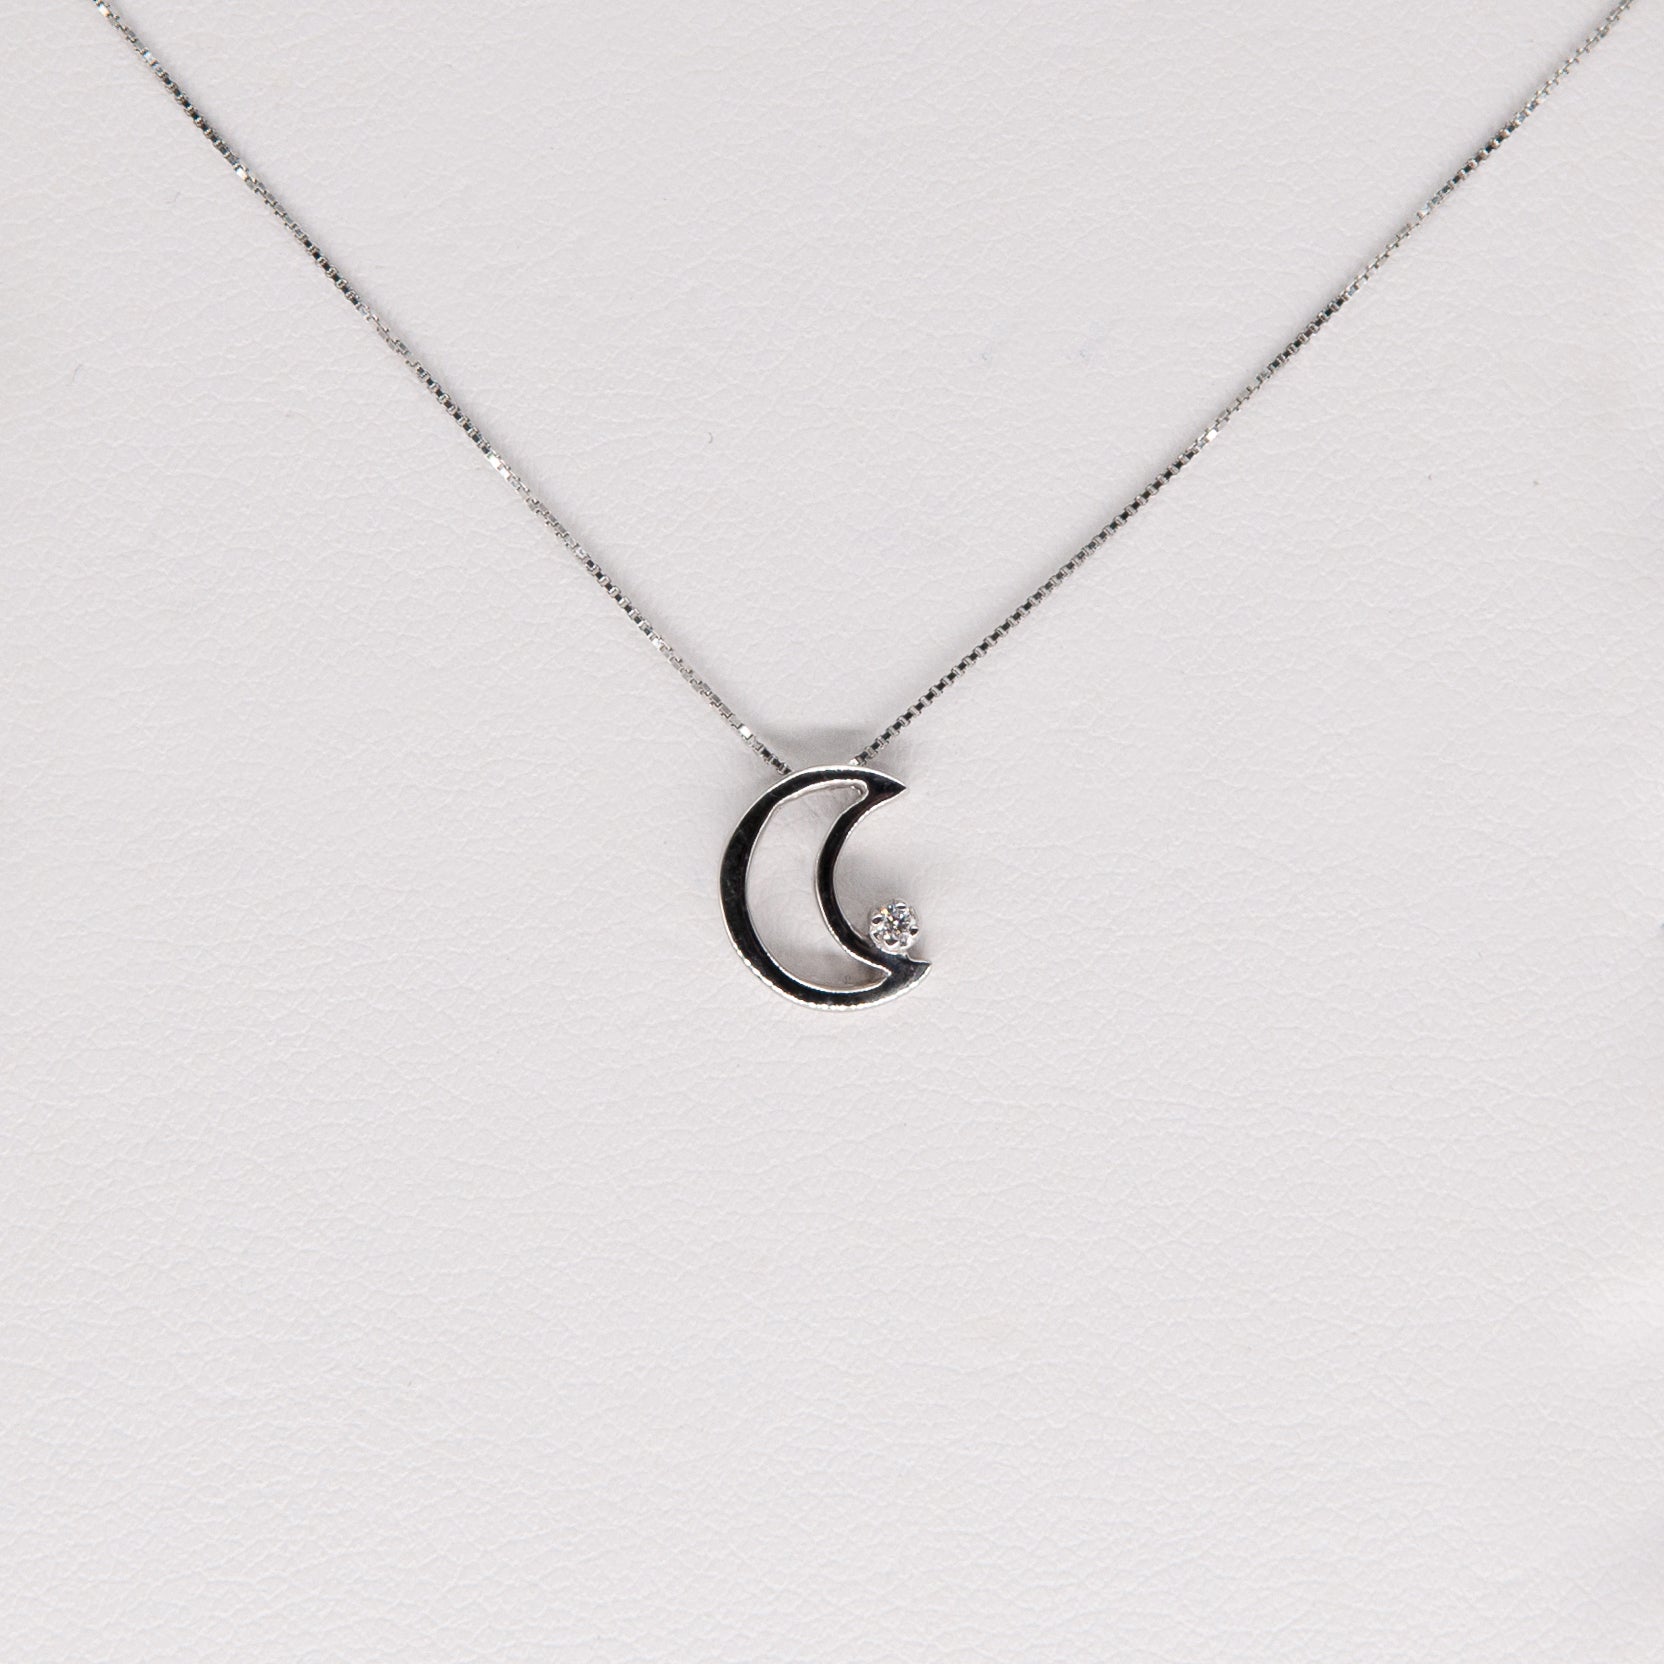 Moon necklace with diamond